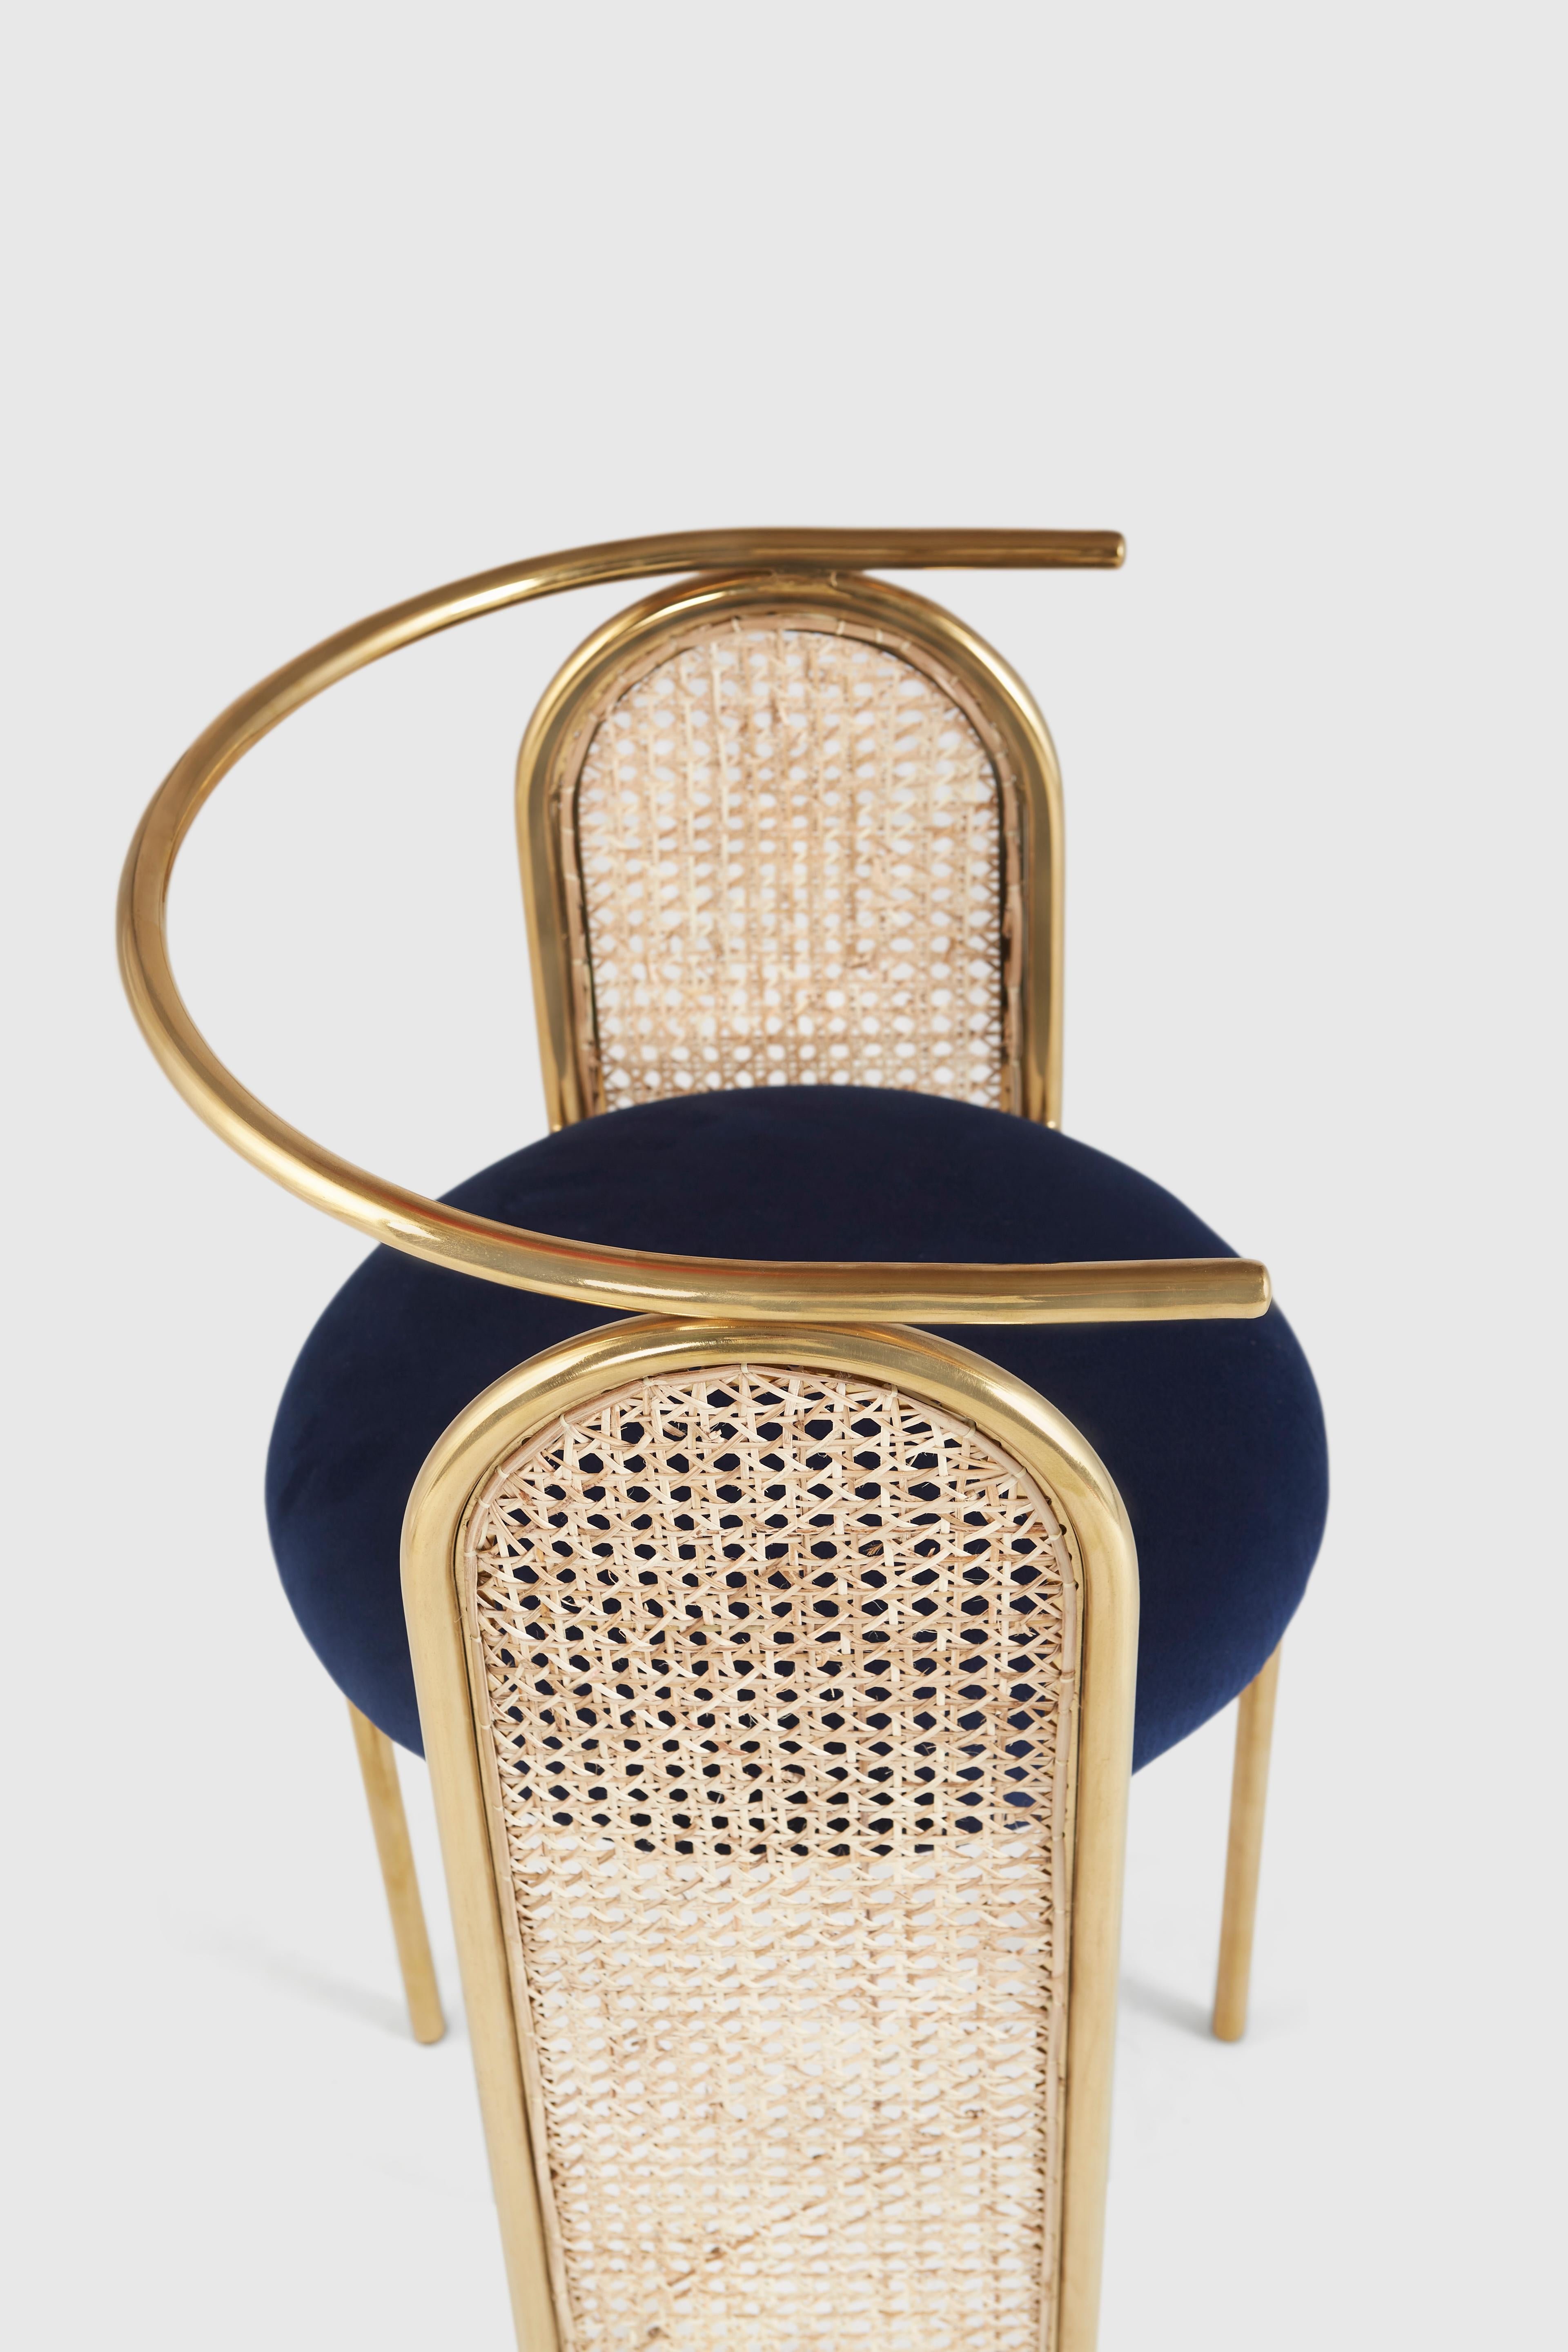 Post-Modern Unique Arco Chair Gold by Hatsu